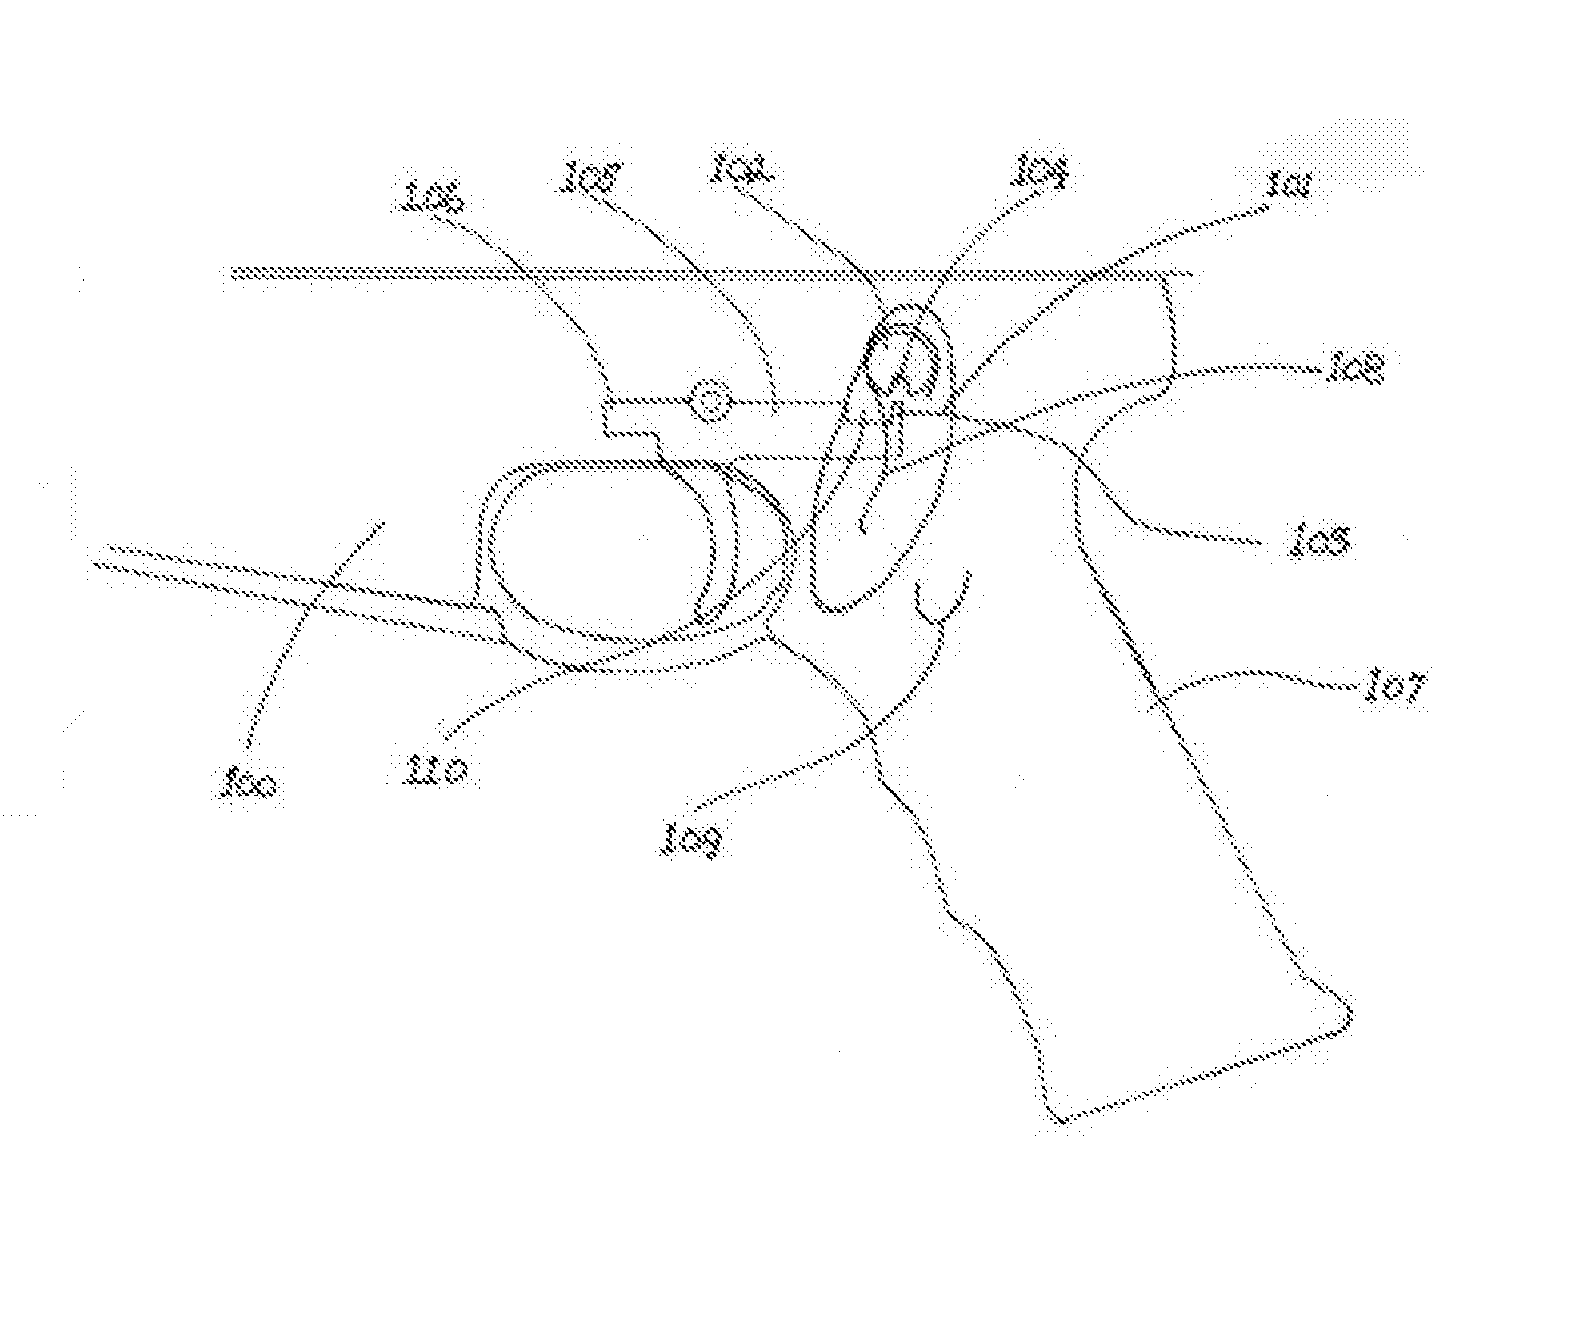 Apparatus for firearm safety